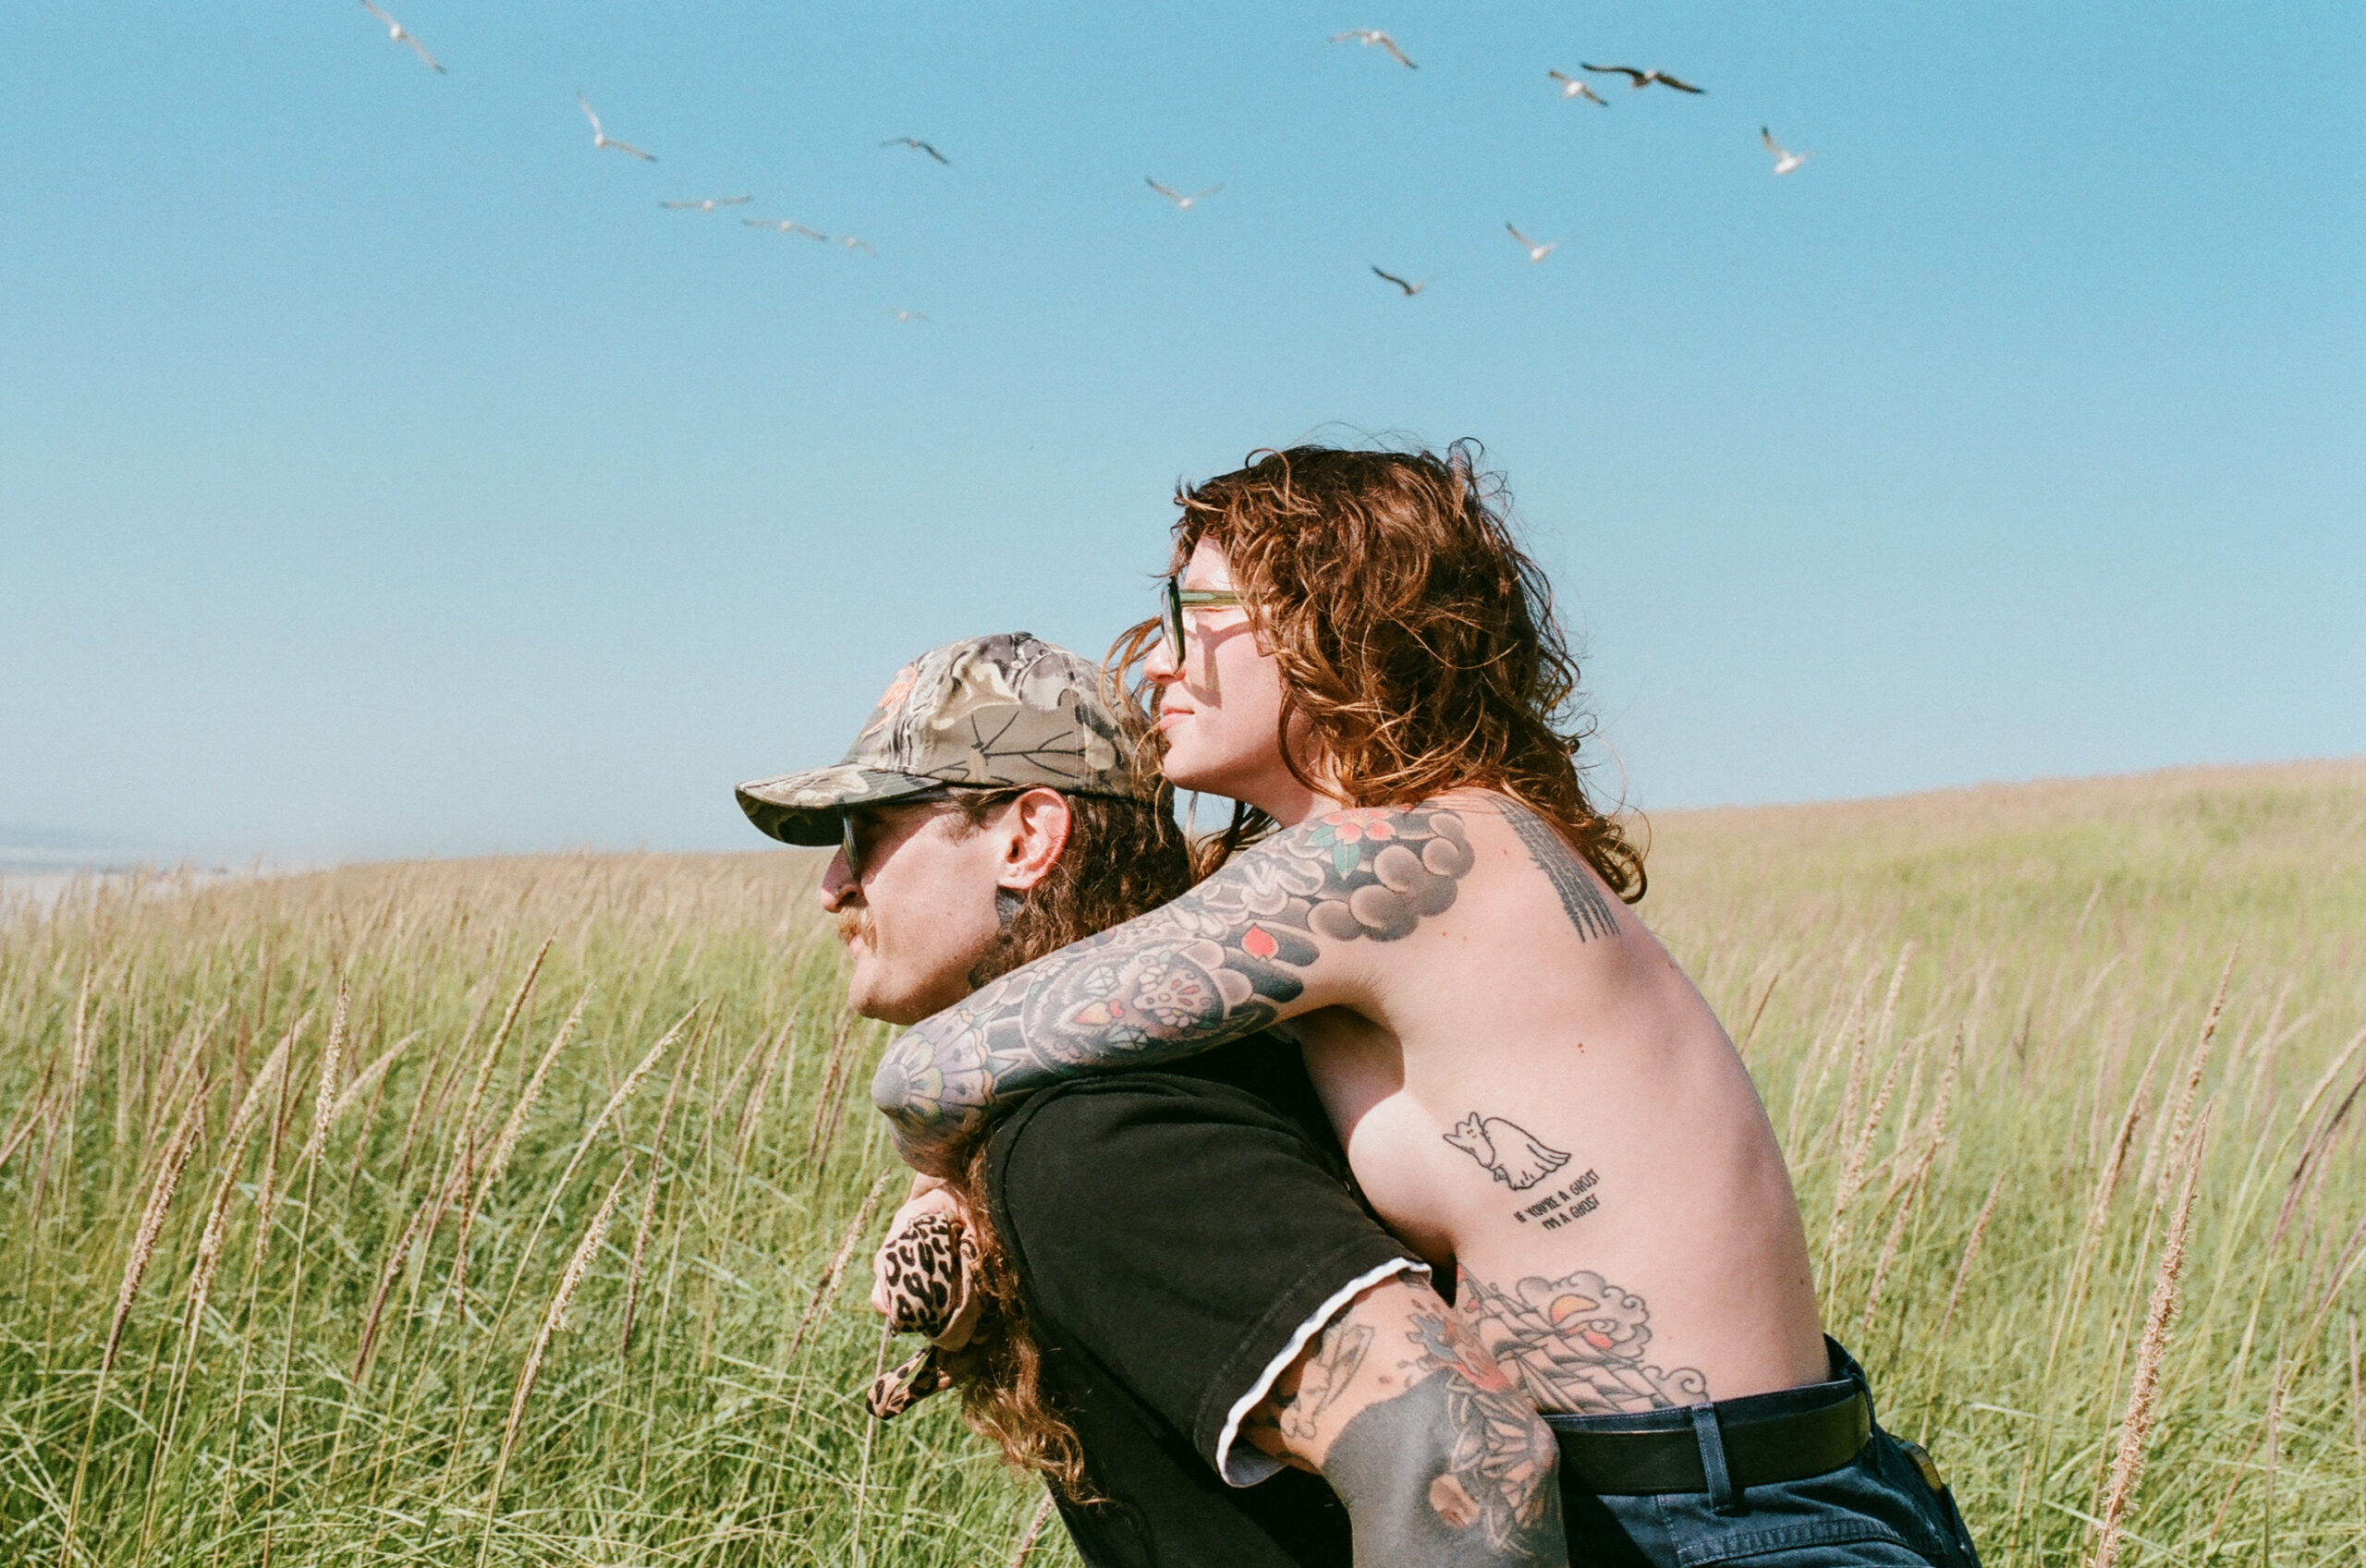 couple standing in an open grassy field with a bright blue sky and seagulls